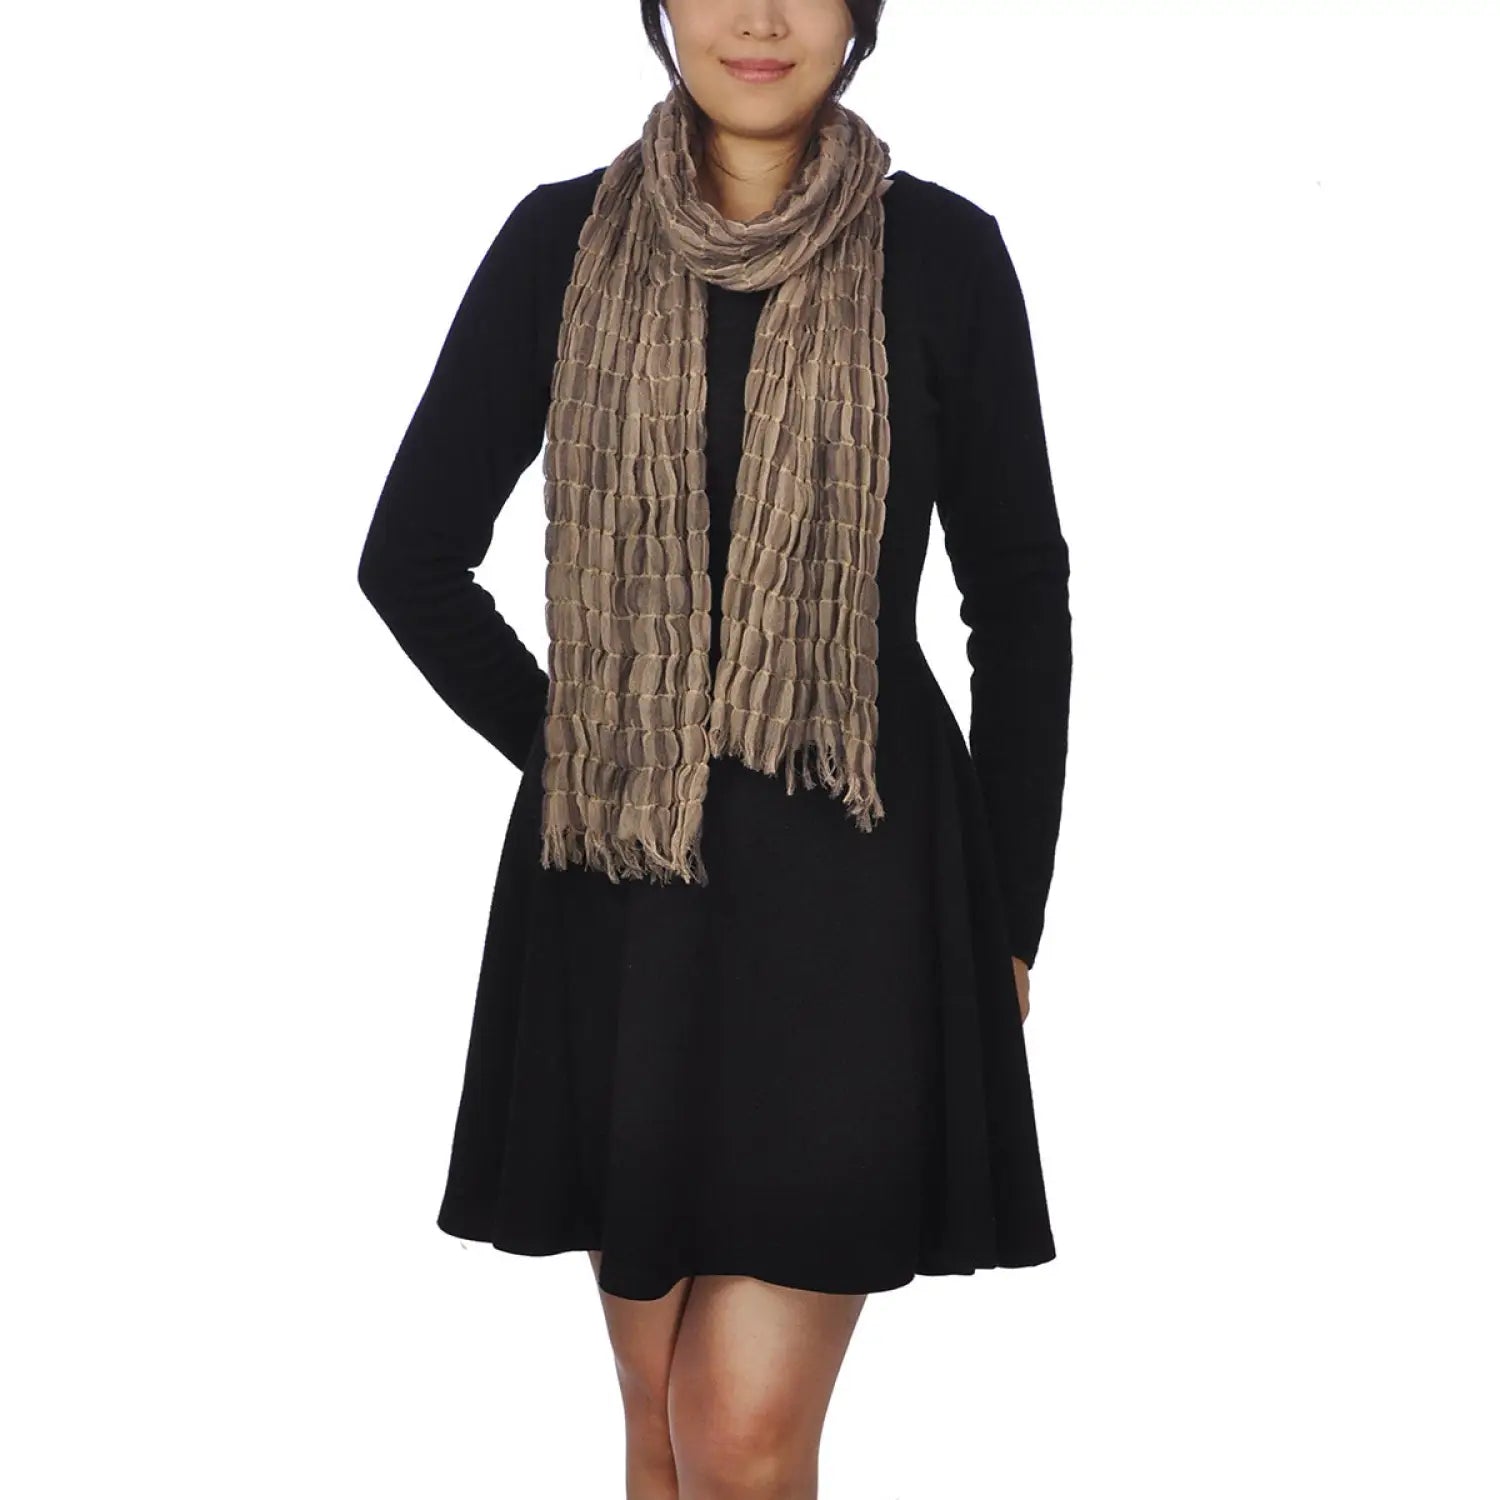 Woman in black dress wearing Textured Check Print Tasselled Warm Crinkled Scarf